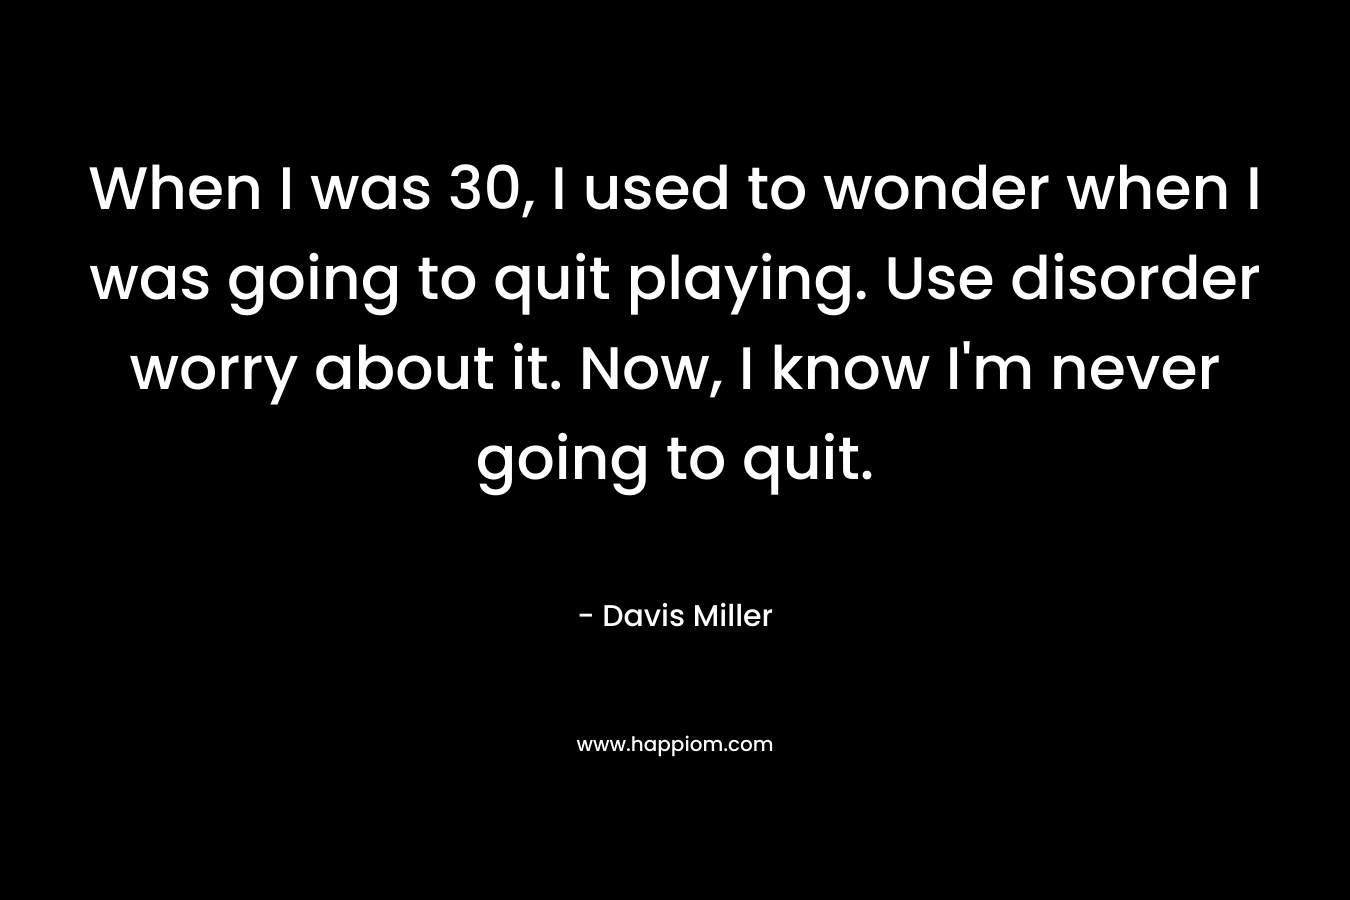 When I was 30, I used to wonder when I was going to quit playing. Use disorder worry about it. Now, I know I'm never going to quit.